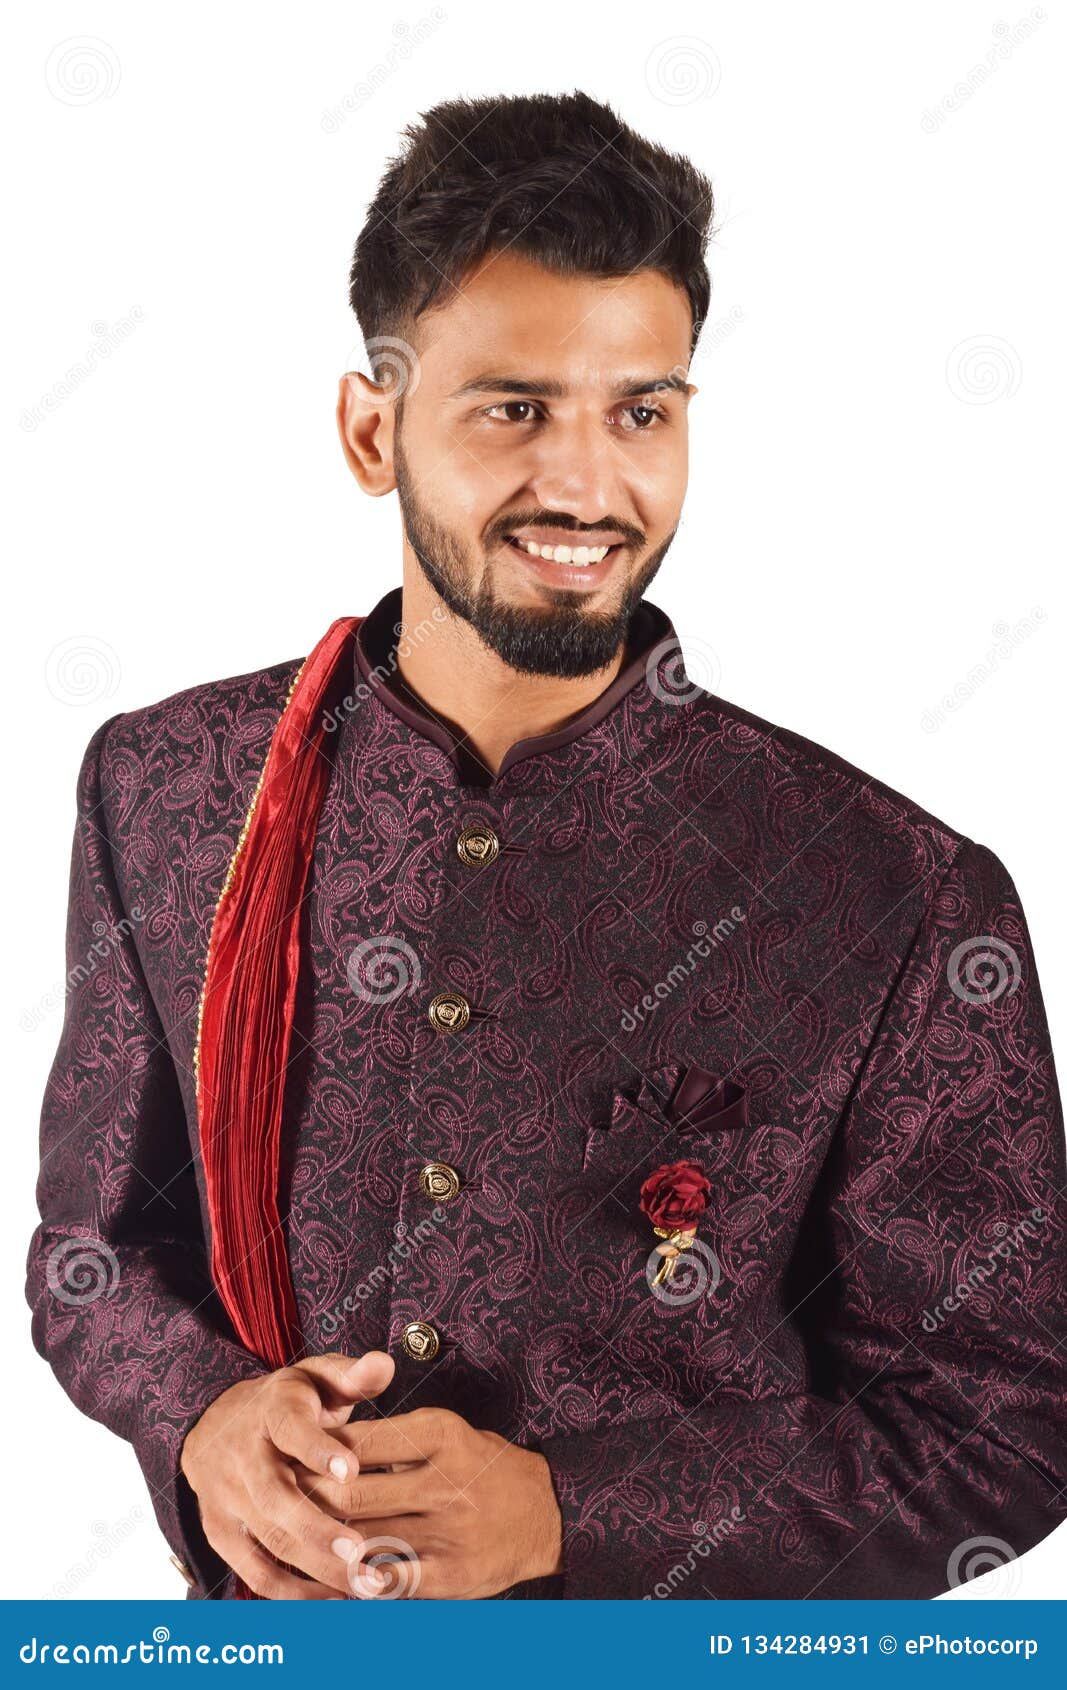 Image of Indian Man Wearing Traditional Wear At a Function and Posing -SX347508-Picxy